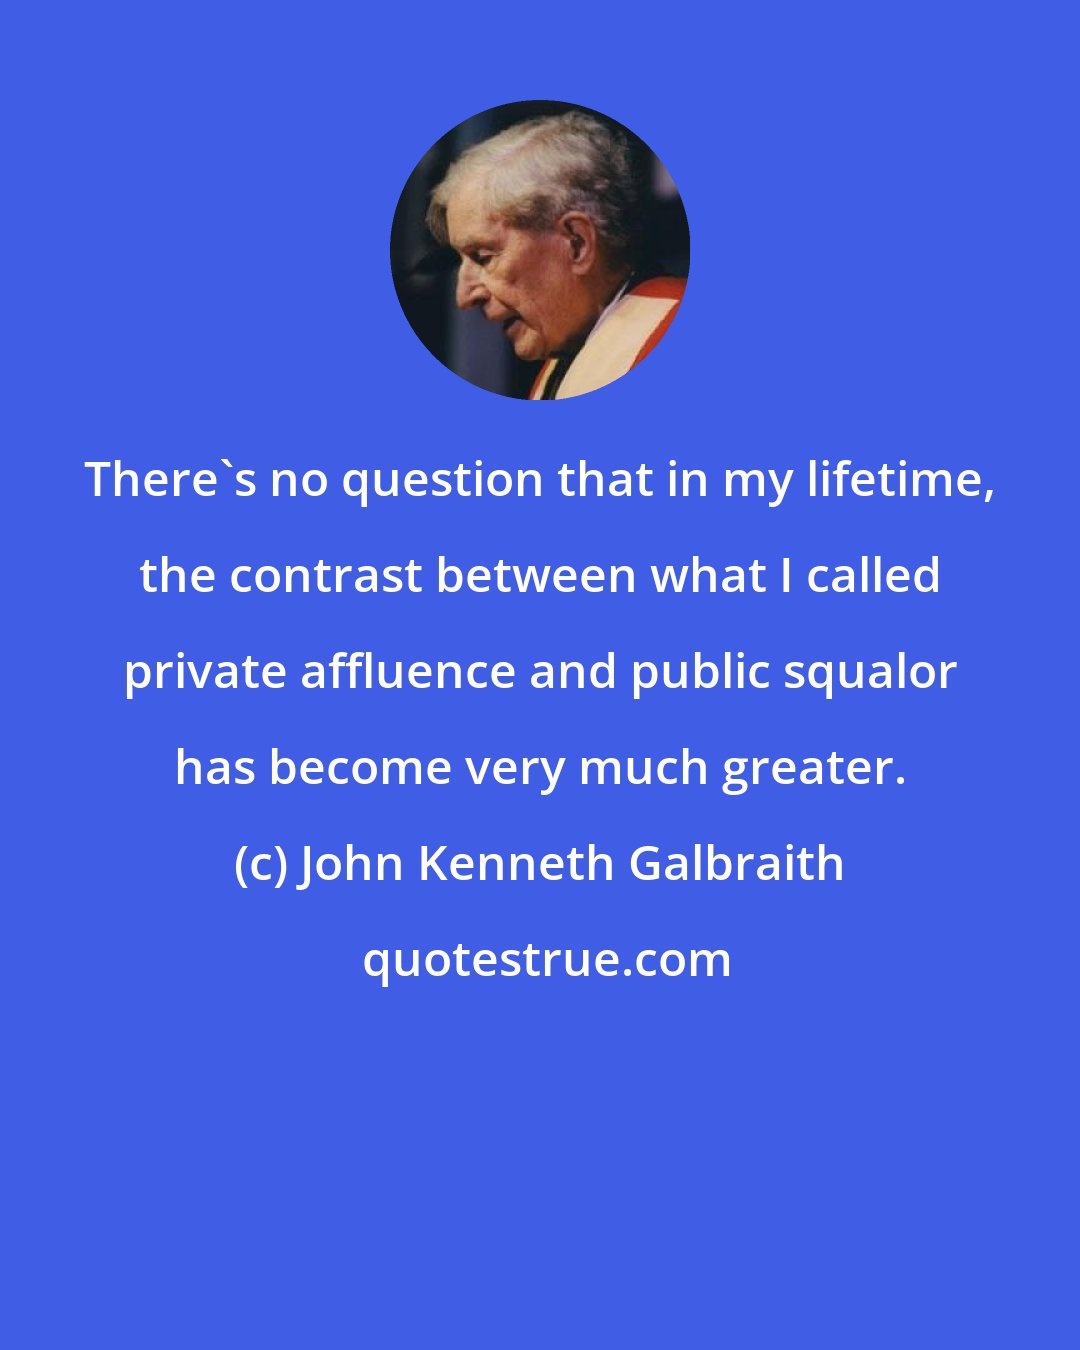 John Kenneth Galbraith: There's no question that in my lifetime, the contrast between what I called private affluence and public squalor has become very much greater.